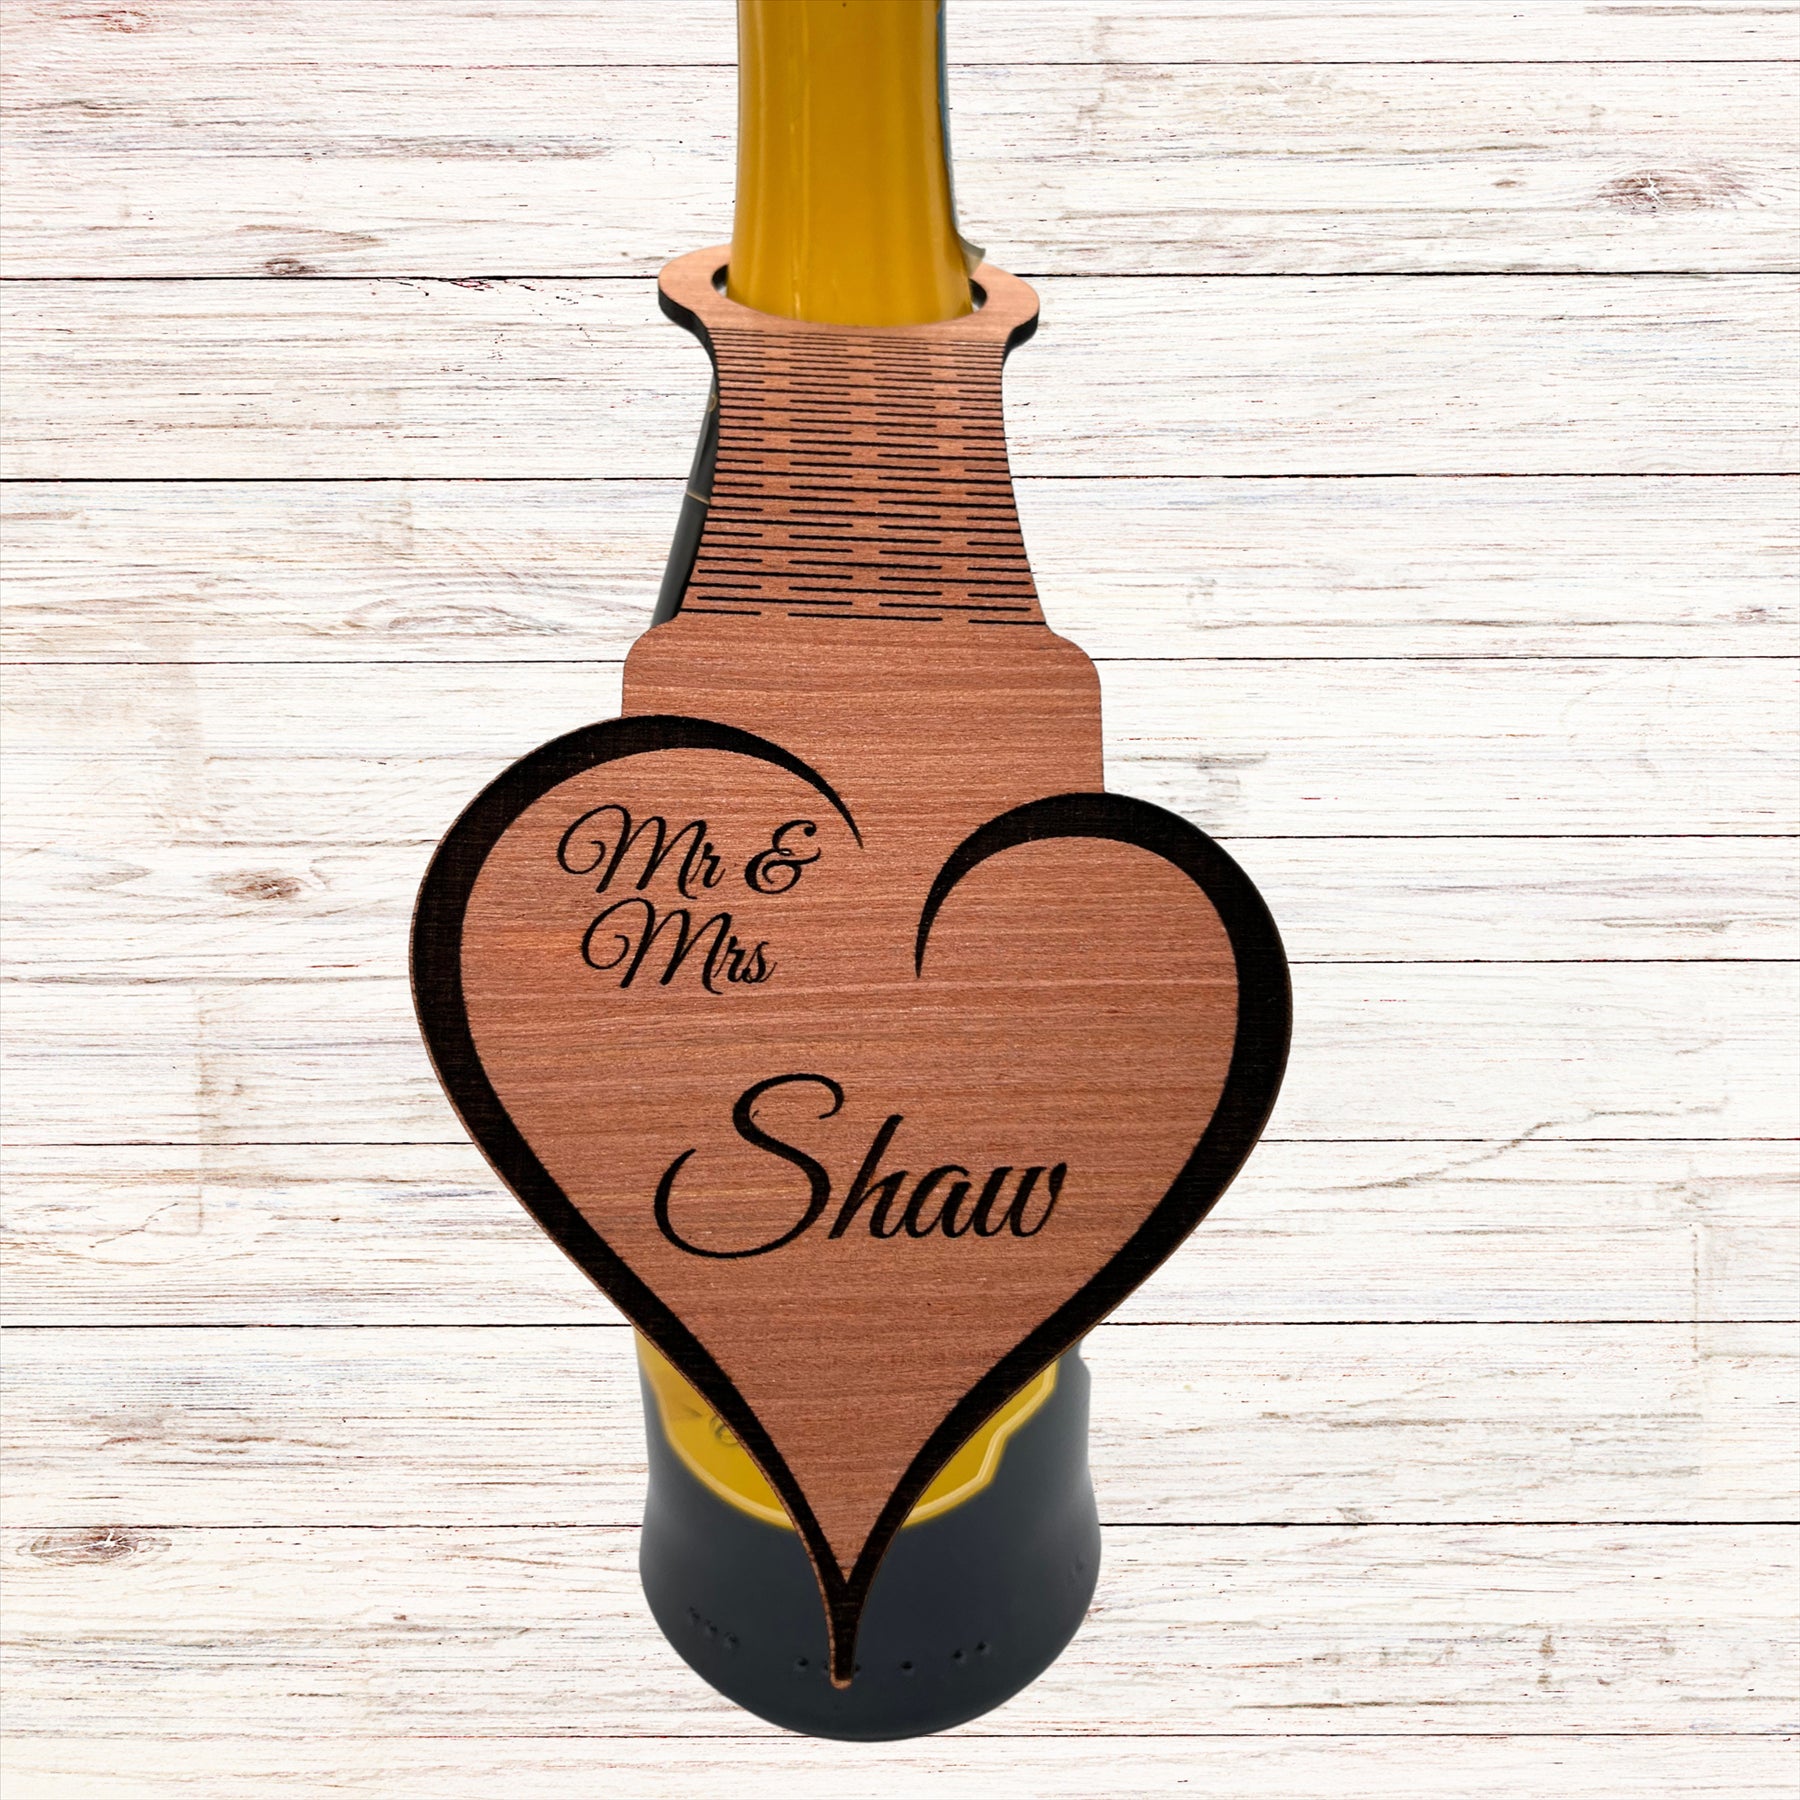 Personalised Wood Wedding Name Place Card for Champagne Wine Bottle Drink Tag - Just Horse Riders